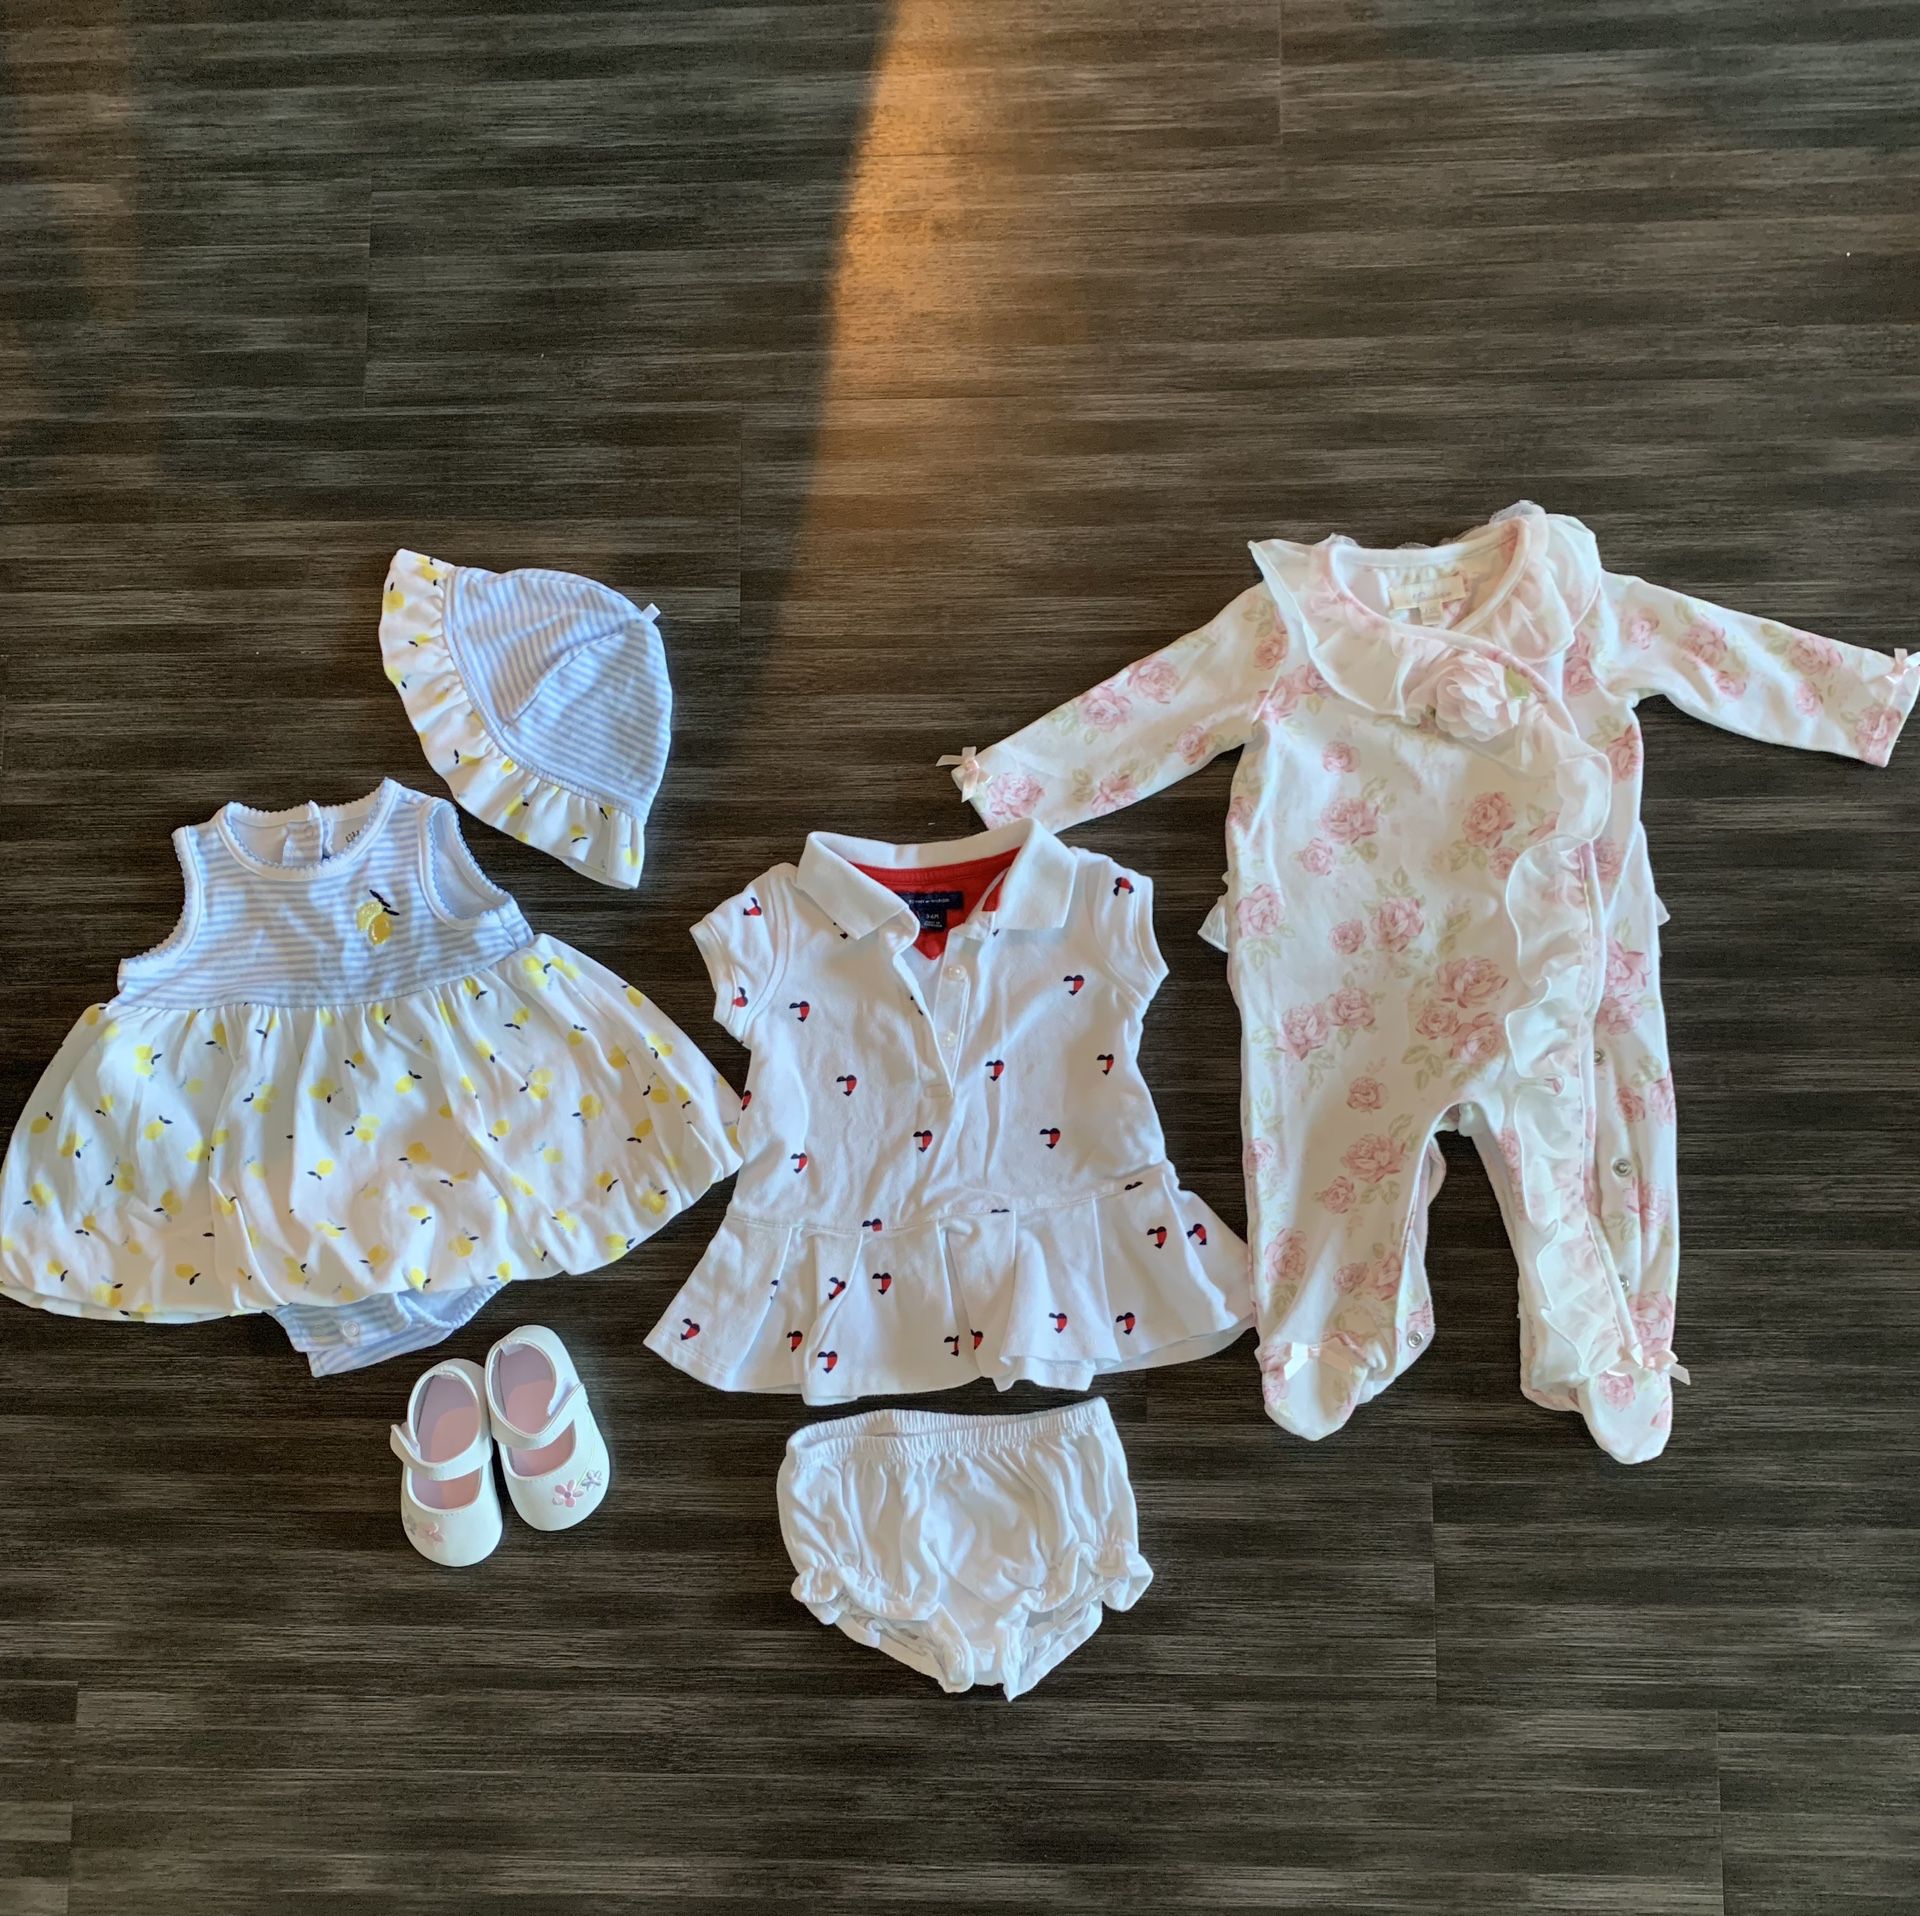 Baby girl clothing bundle 3-6 months